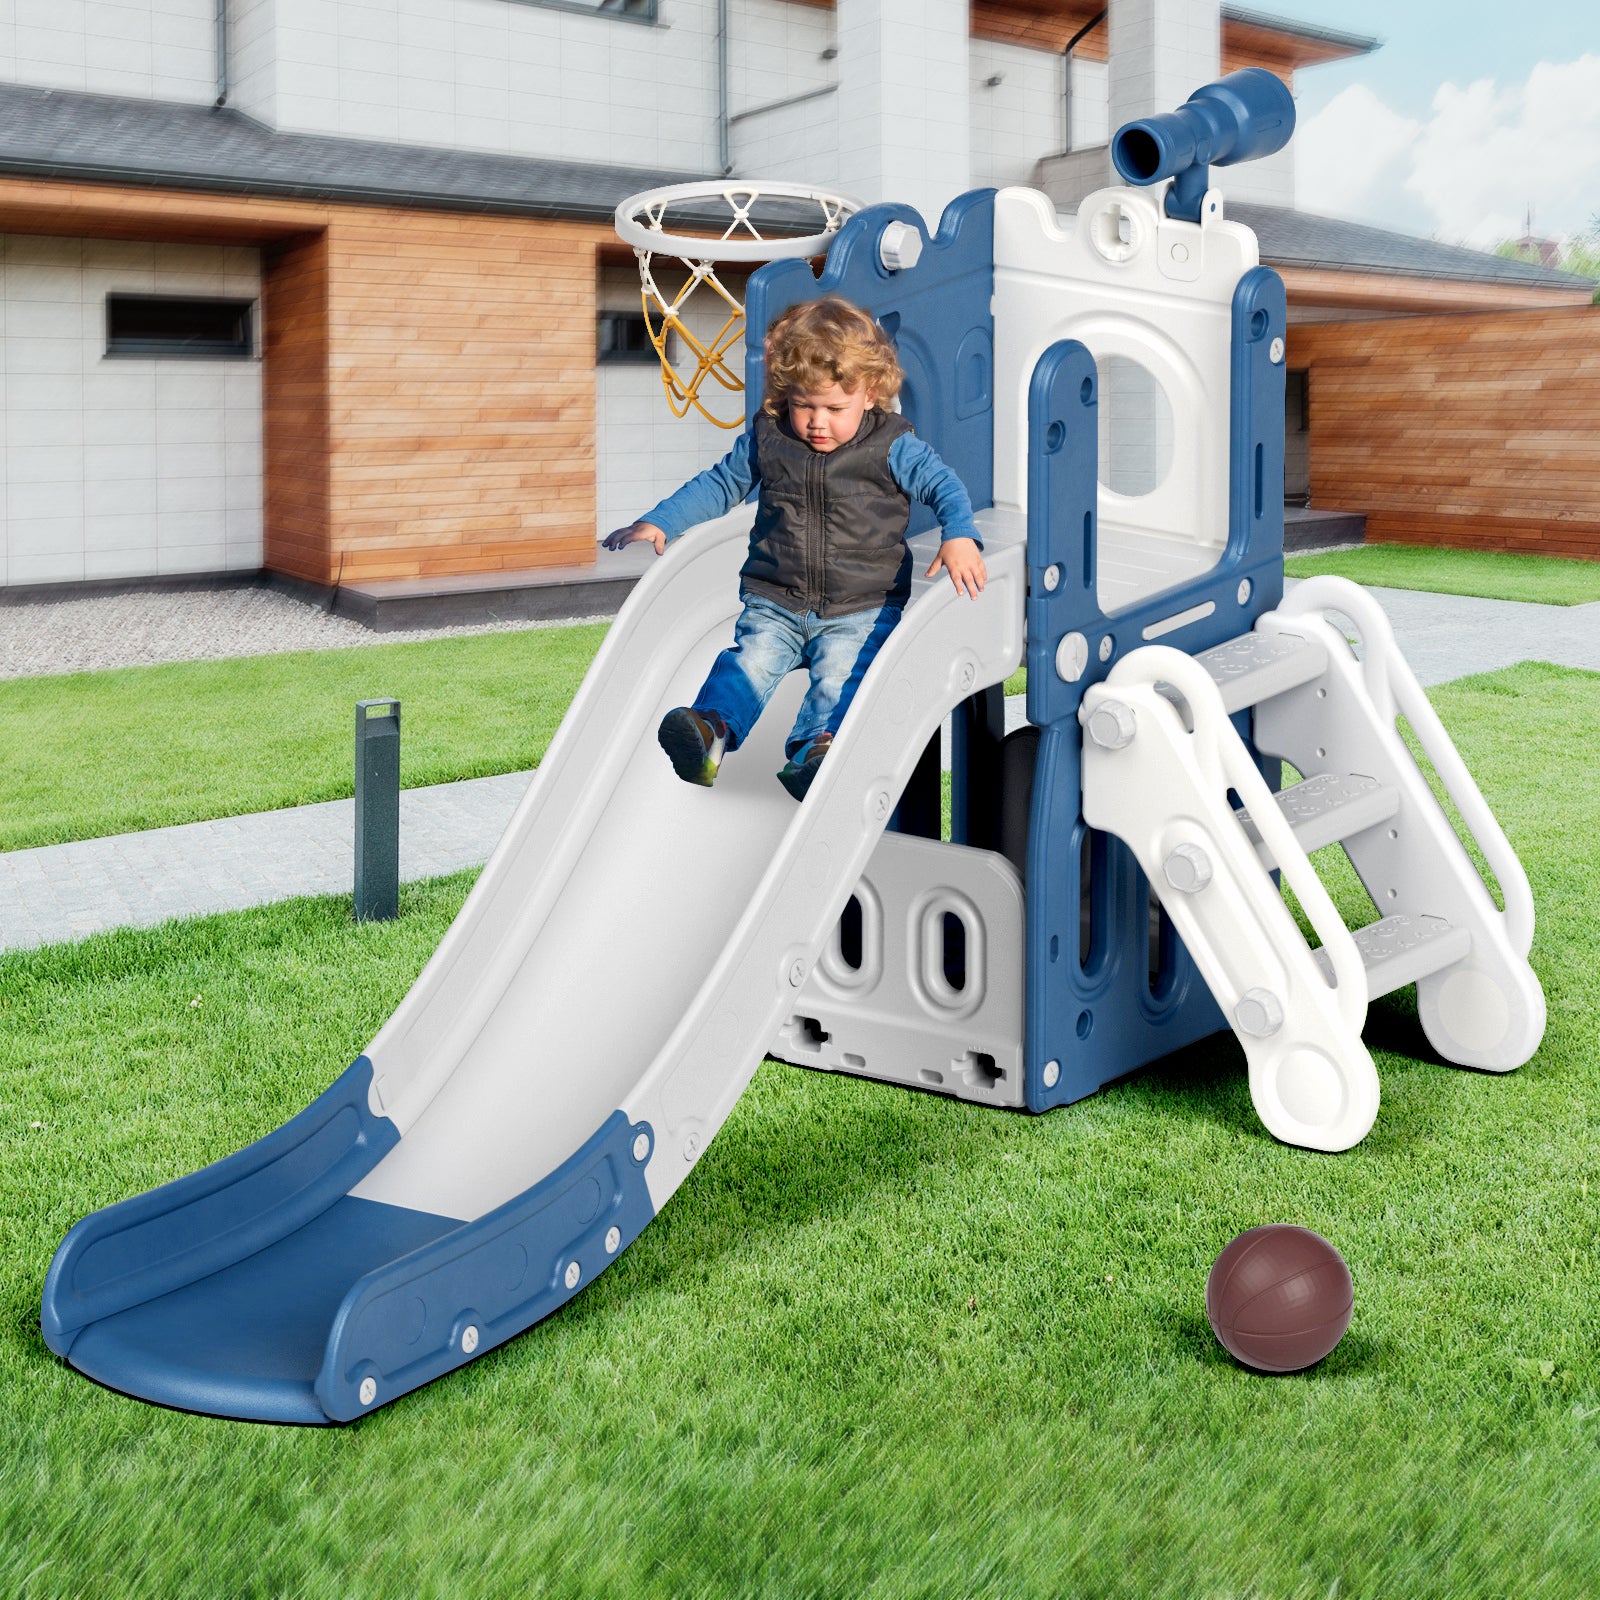 XJD 5-in-1 Toddler Slide Set in Blue Freestanding Climber Playset for Ages 1-3, Outdoor/Indoor Playset with Basketball Hoop and Ball